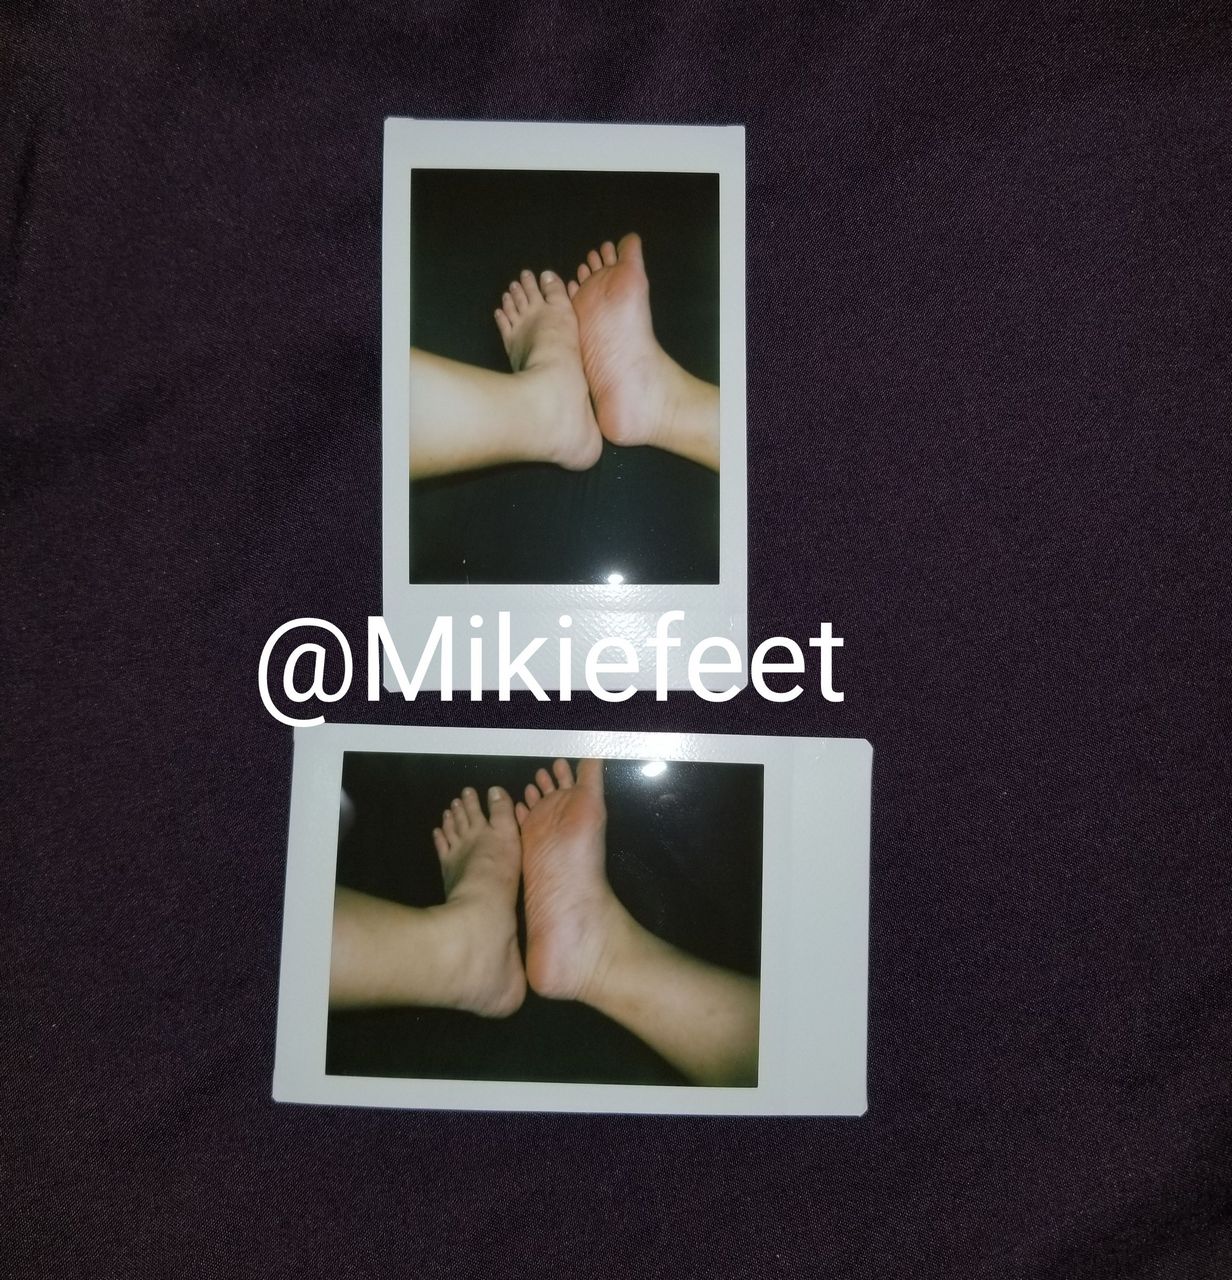 Mikiefeet Mikiefeet Contents